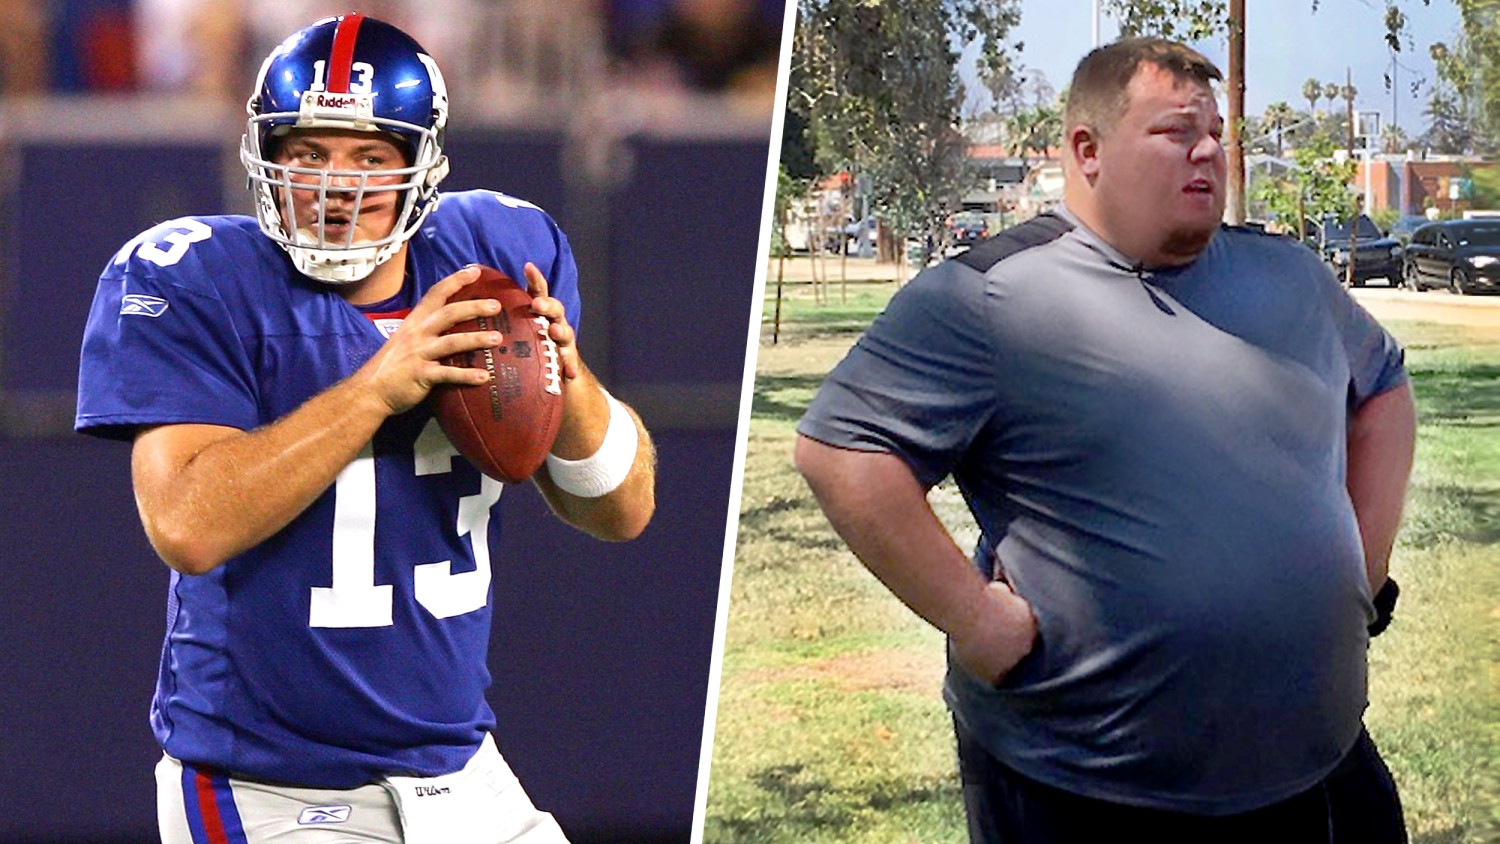 Current, former New York Giants mourn passing of Jared Lorenzen